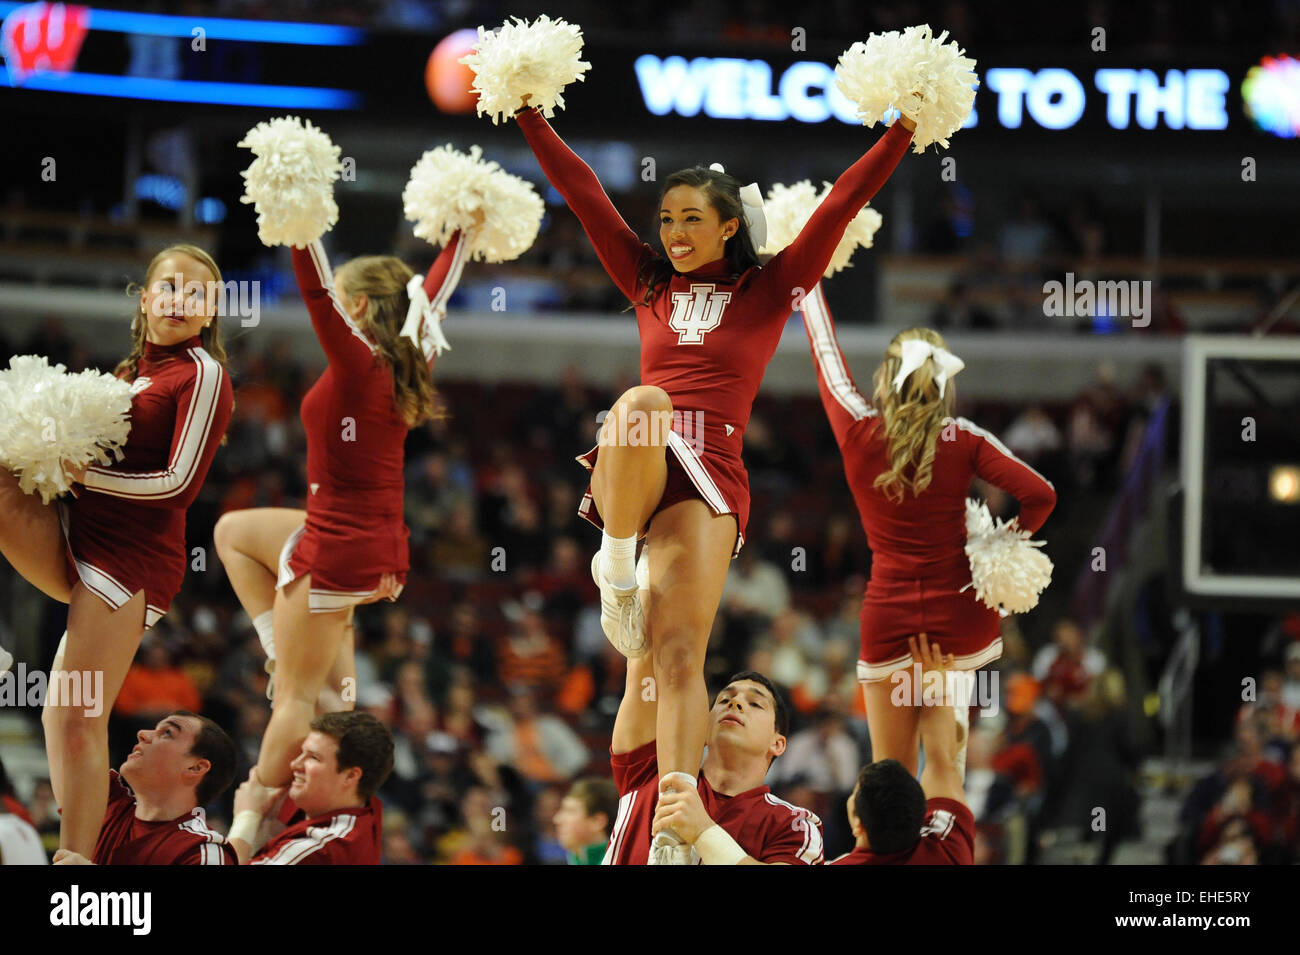 Chicago, IL, USA. 12th Mar, 2015. Indiana Hoosiers cheerleaders perform in the second half during the 2015 Big Ten Men's Basketball Tournament game between the Northwestern Wildcats and the Indiana Hoosiers at the United Center in Chicago, IL. Patrick Gorski/CSM/Alamy Live News Stock Photo